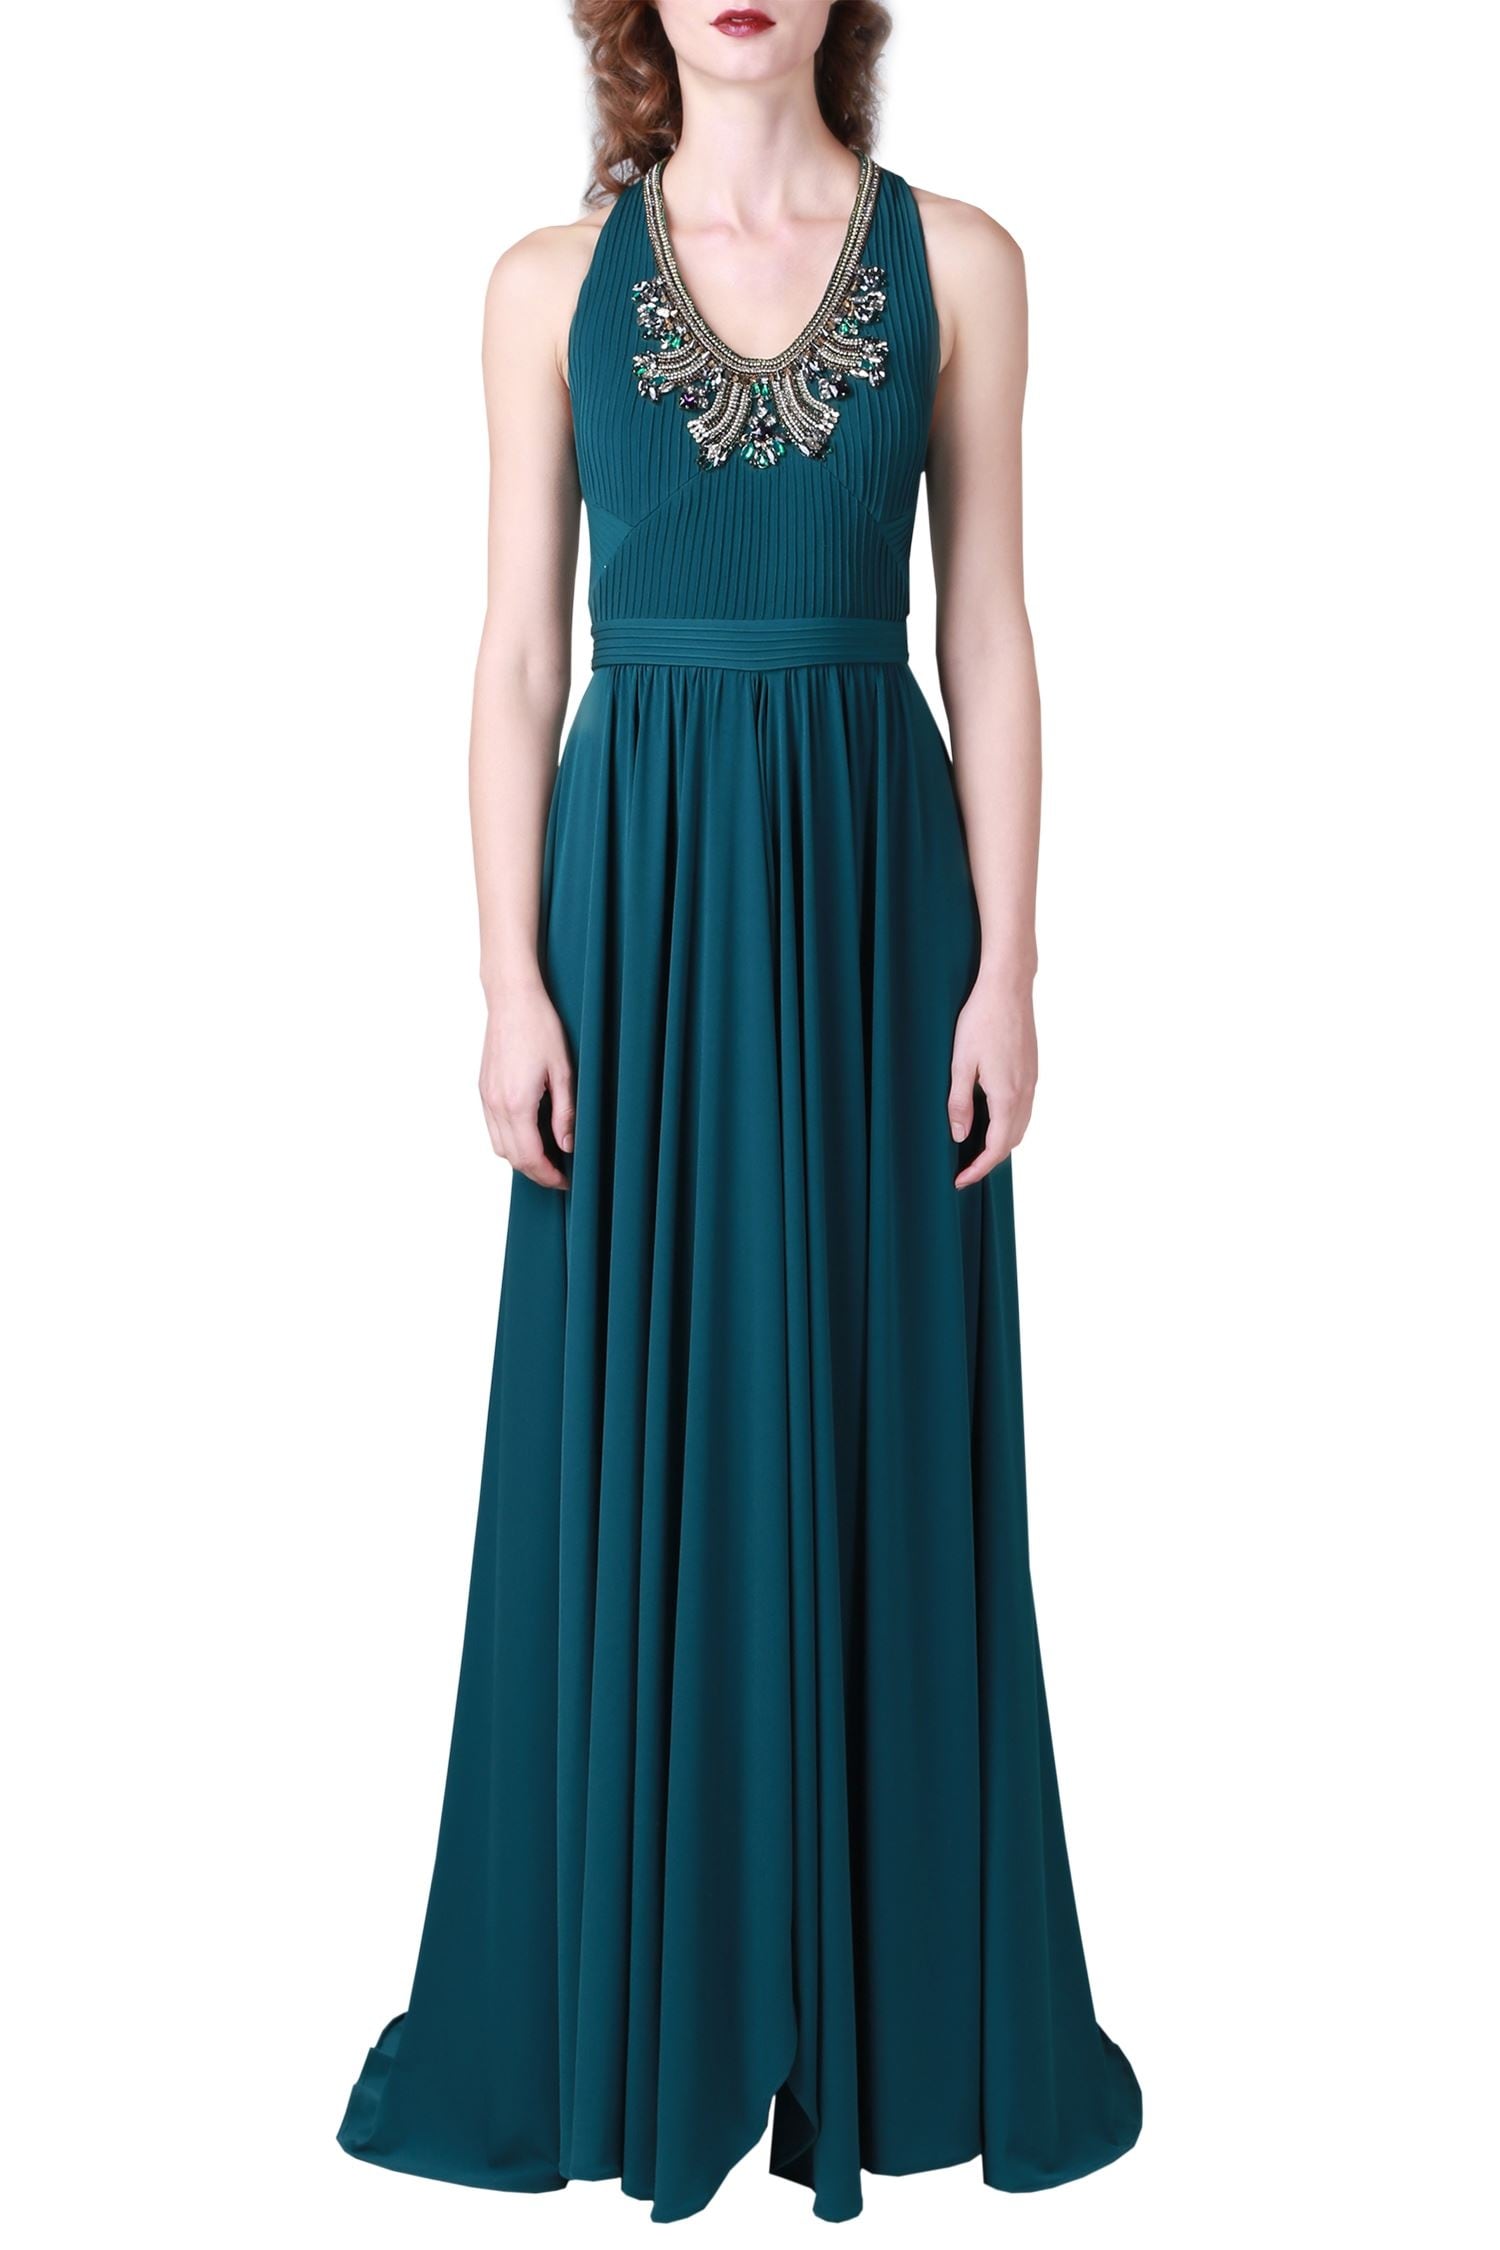 Buy Peacock blue embellished jersey gown by Ranna Gill at Aza Fashions